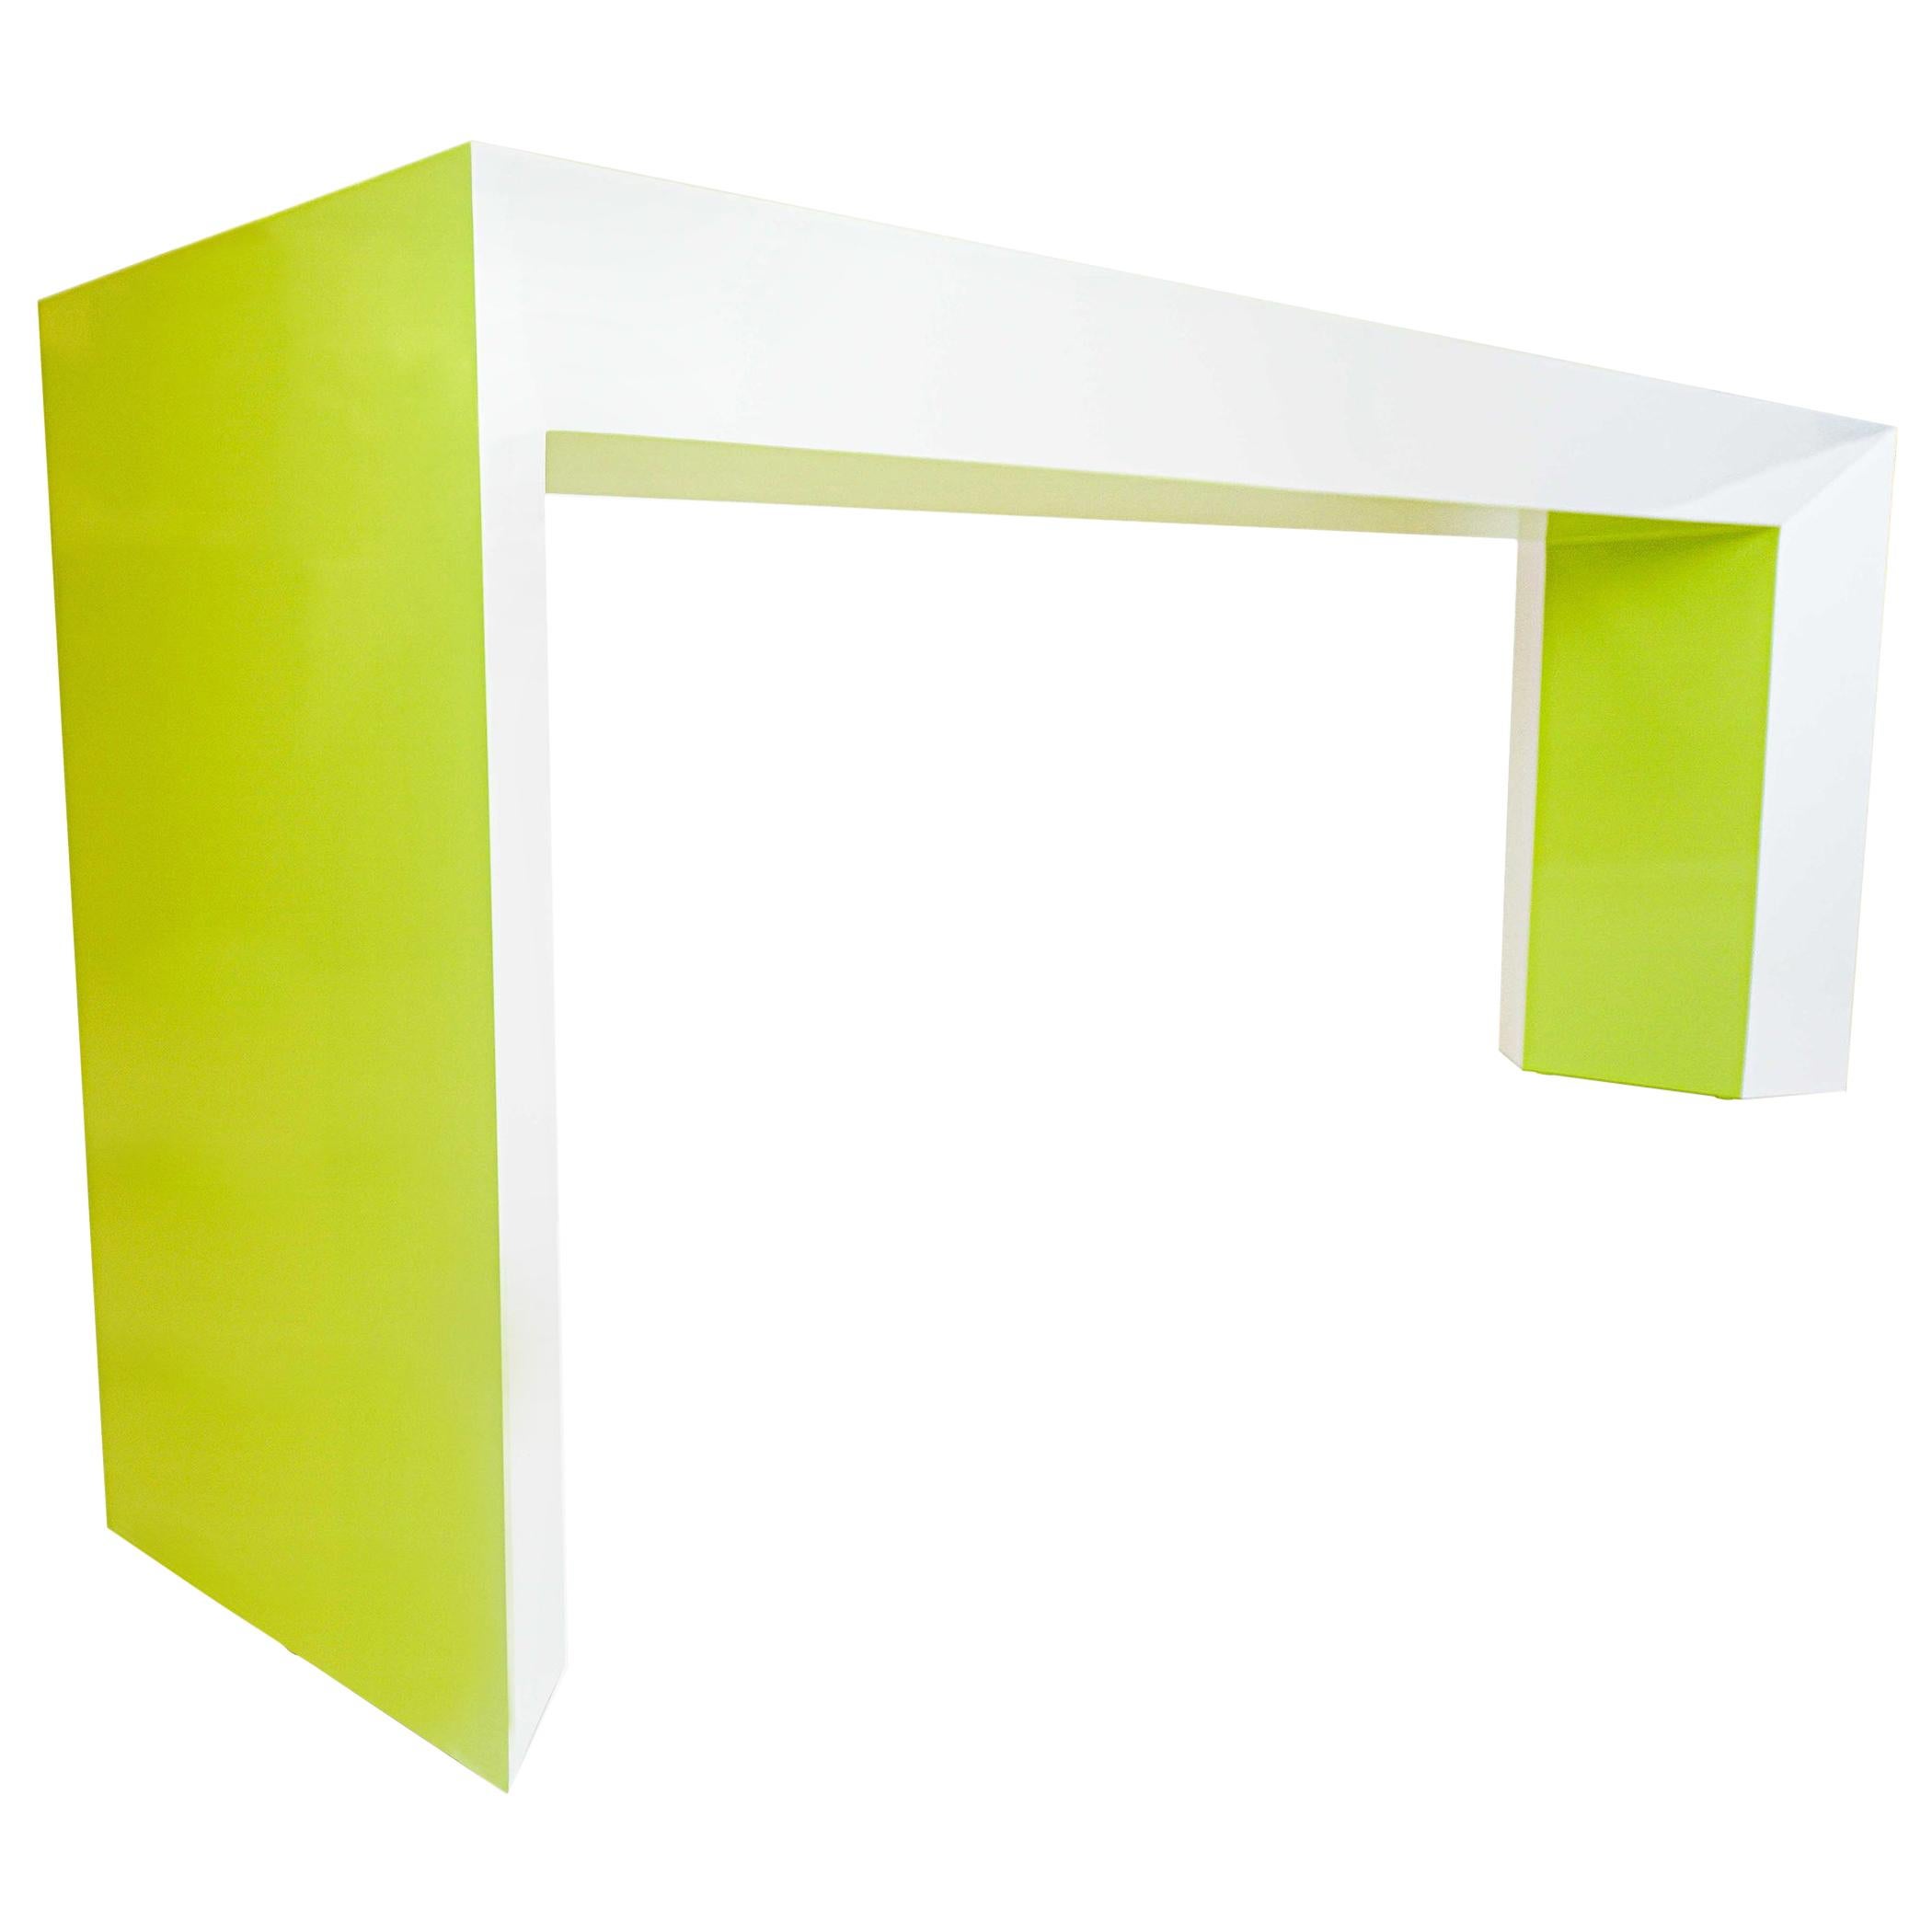 Lime Green and White Lacquer Console For Sale